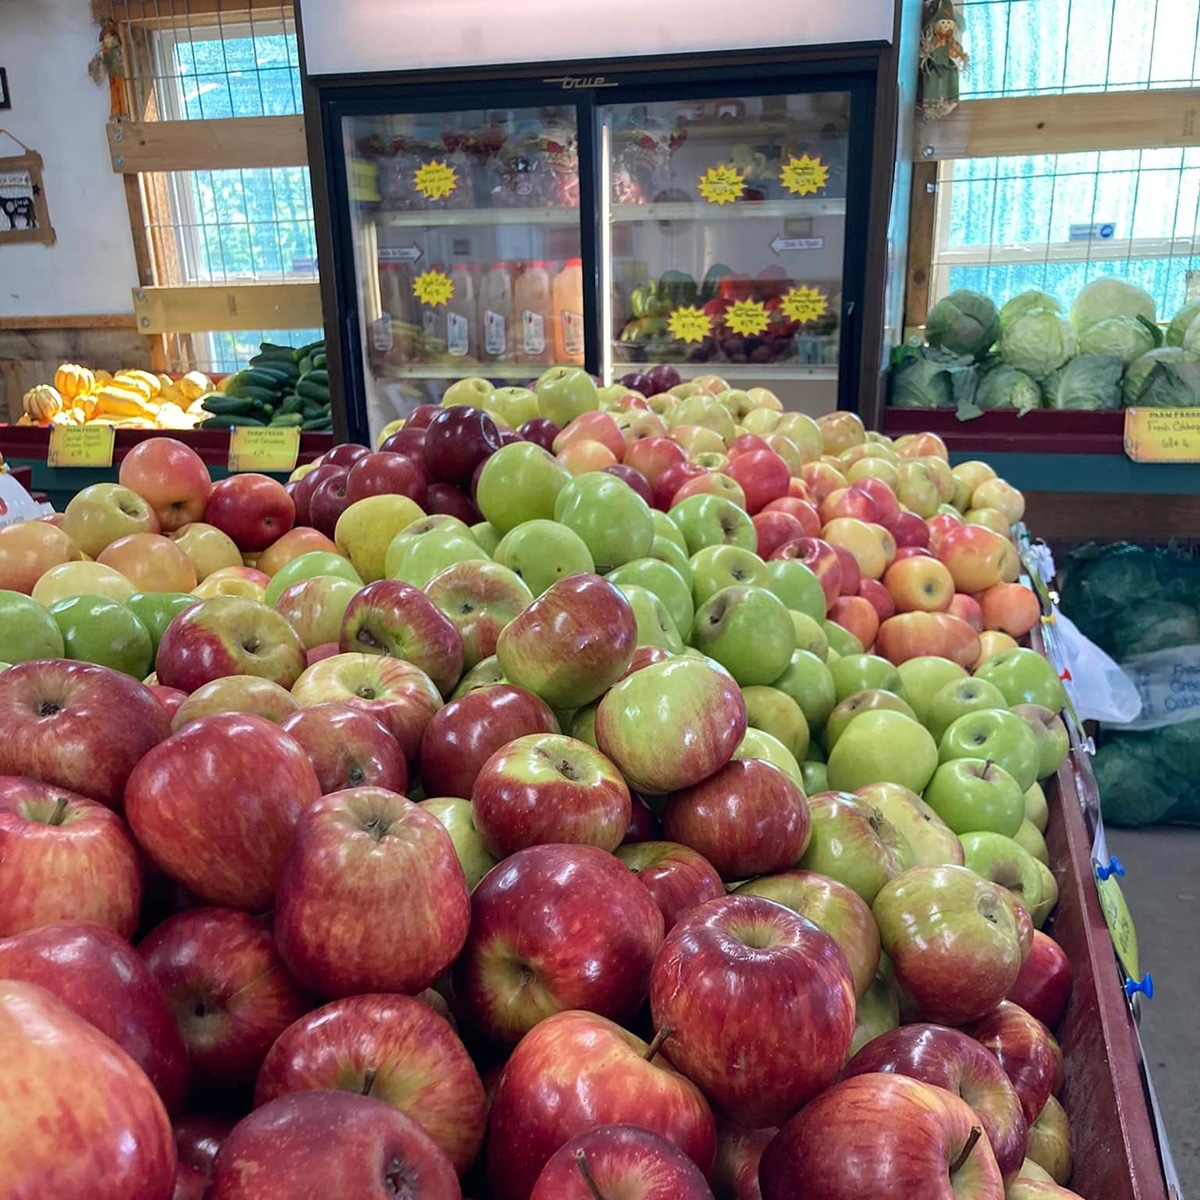 Piles of apples and other fresh produce inside Jimmy's Produce in Bryson City, North Carolina.